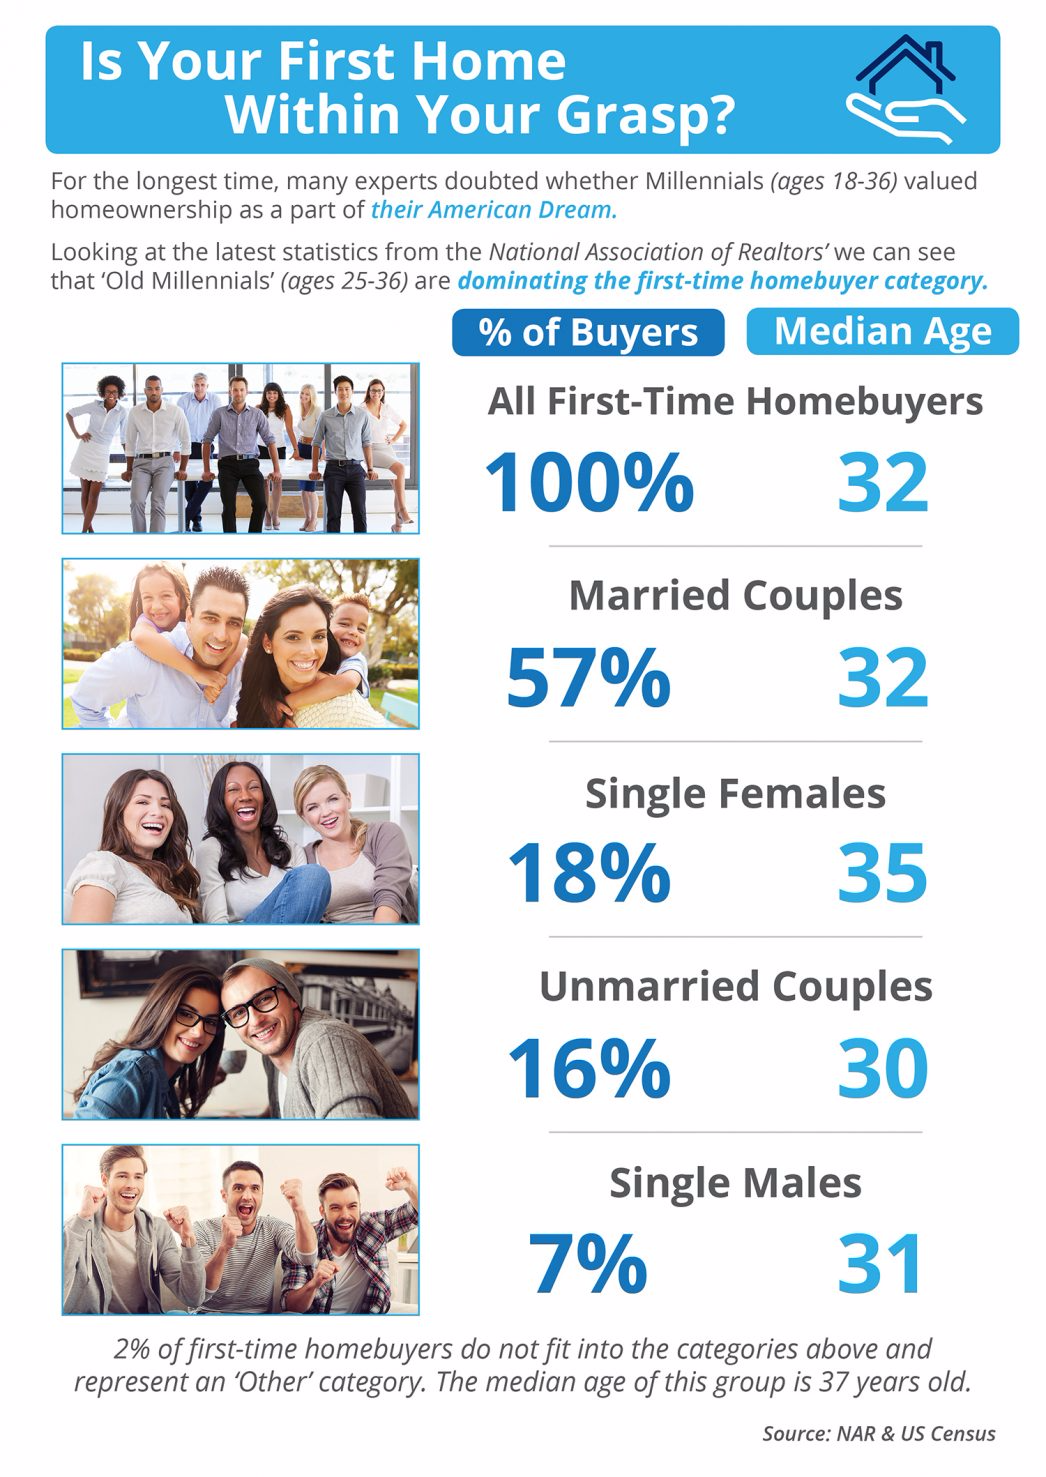 Is Your First Home Within Your Grasp Now? [INFOGRAPHIC] | MyKCM